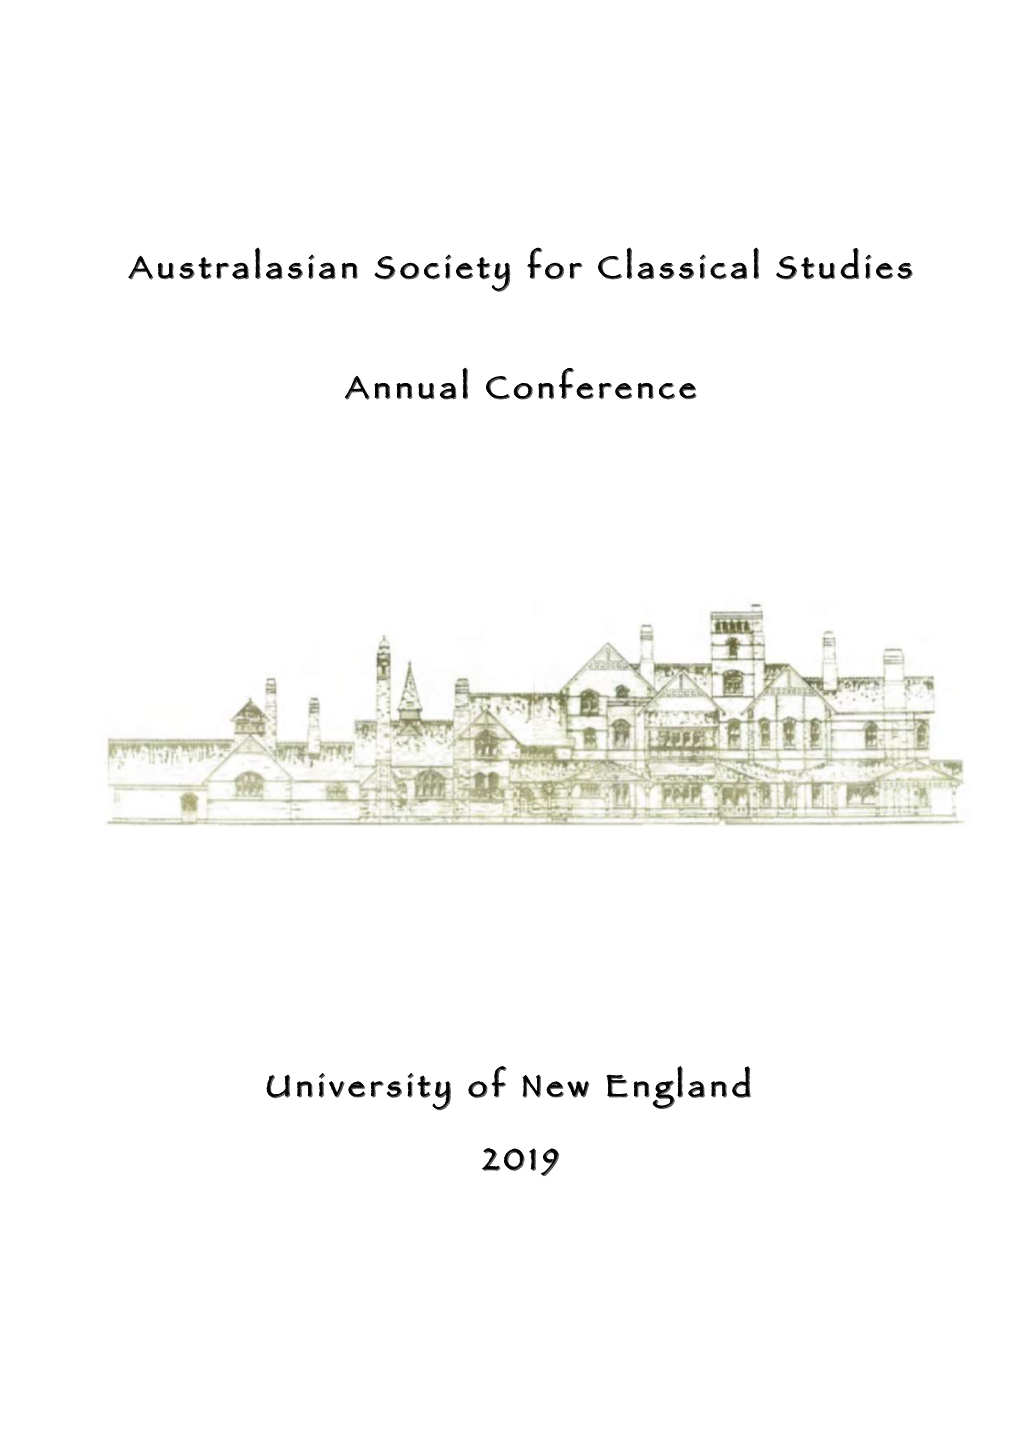 Conference Booklet Contains Information You Need for Navigating Your Way Around ASCS 40 (2019) and Armidale for the Duration of the Conference